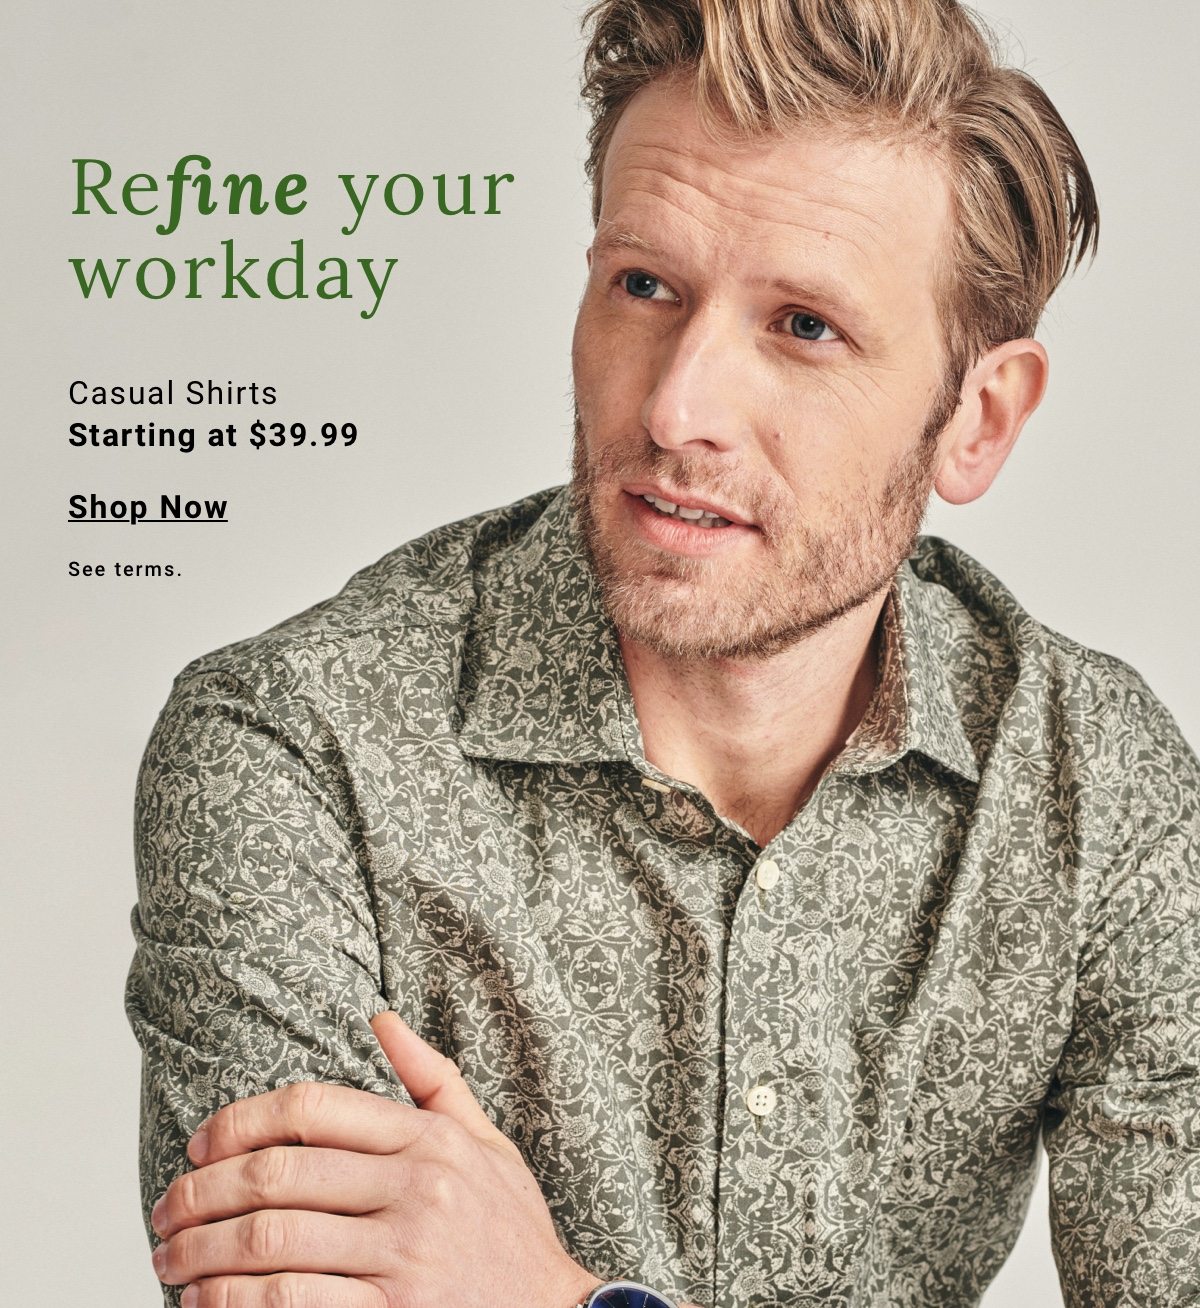 Shop Casual Shirts starting at 39 99 to refine your workday